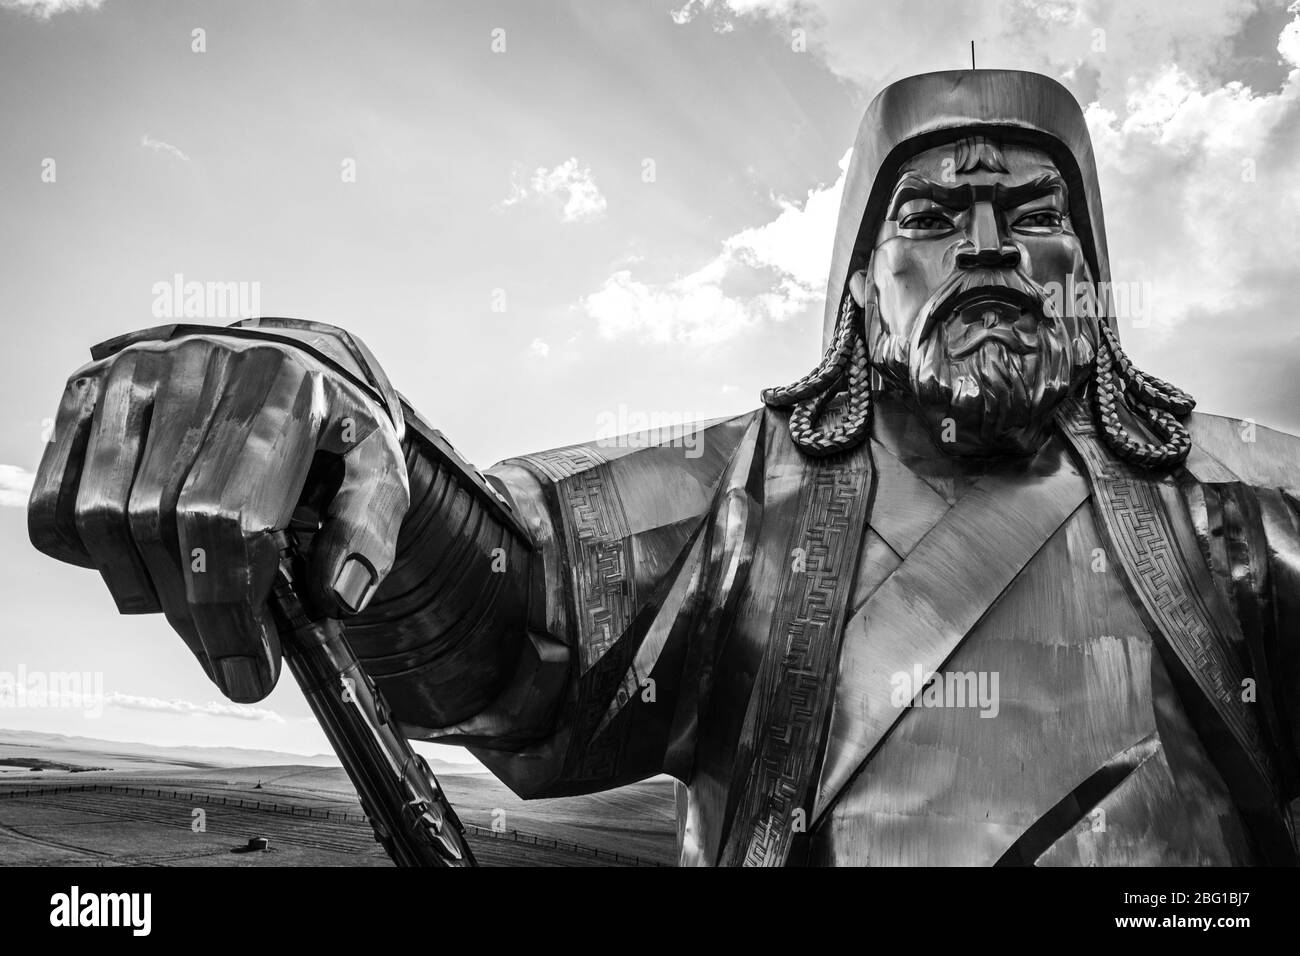 Genghis Khan giant equestrian statue, seen from horse's head - Genghis Khan Statue Complex, Mongolia Stock Photo